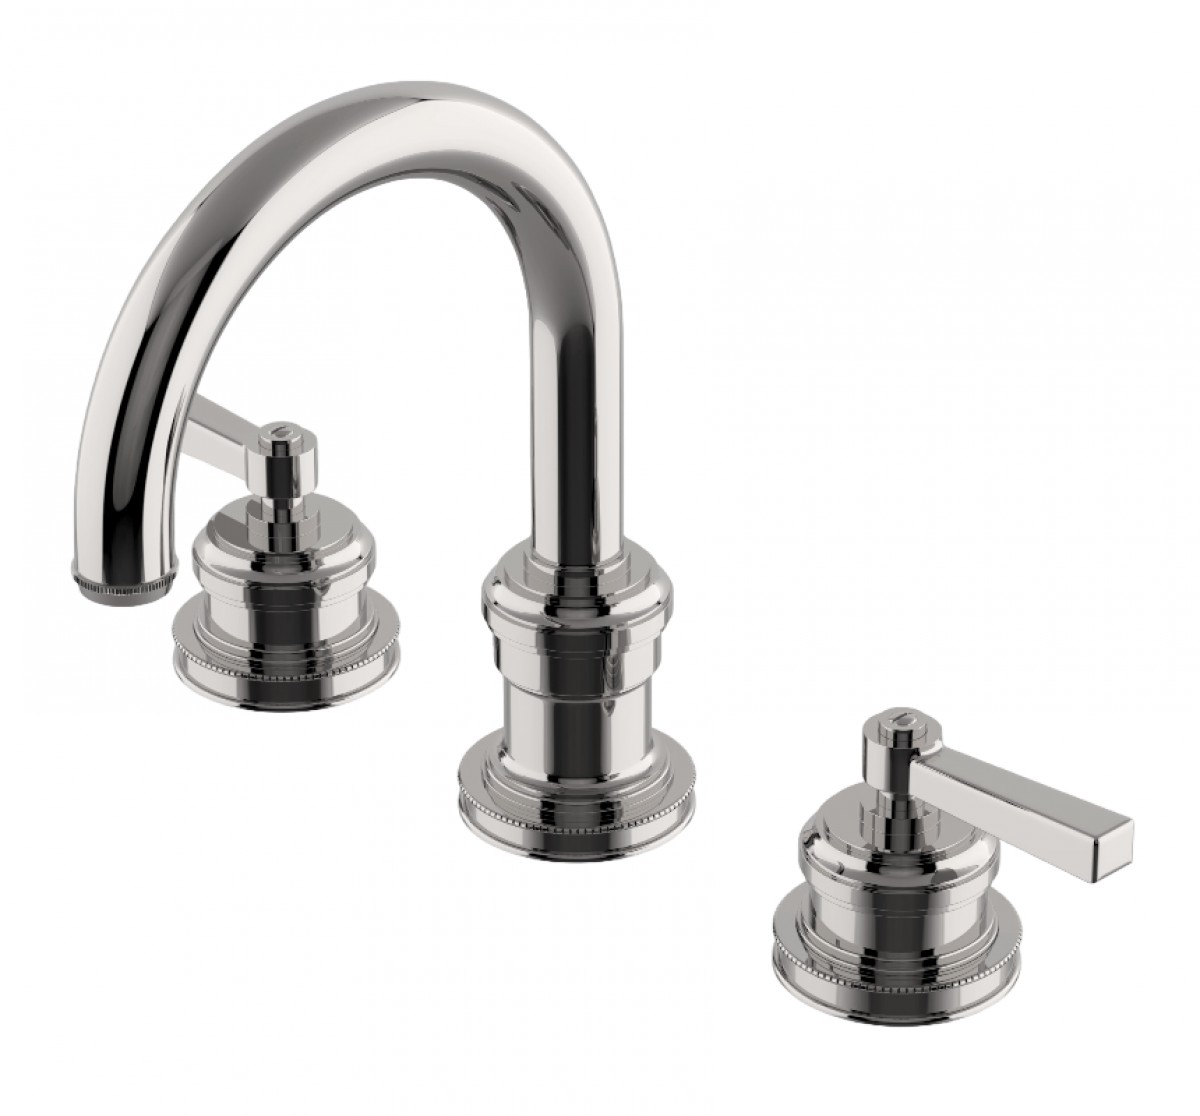 Aero Gooseneck Three Hole Deck Mounted Lavatory Faucet with Metal Lever Handles | Highlight image